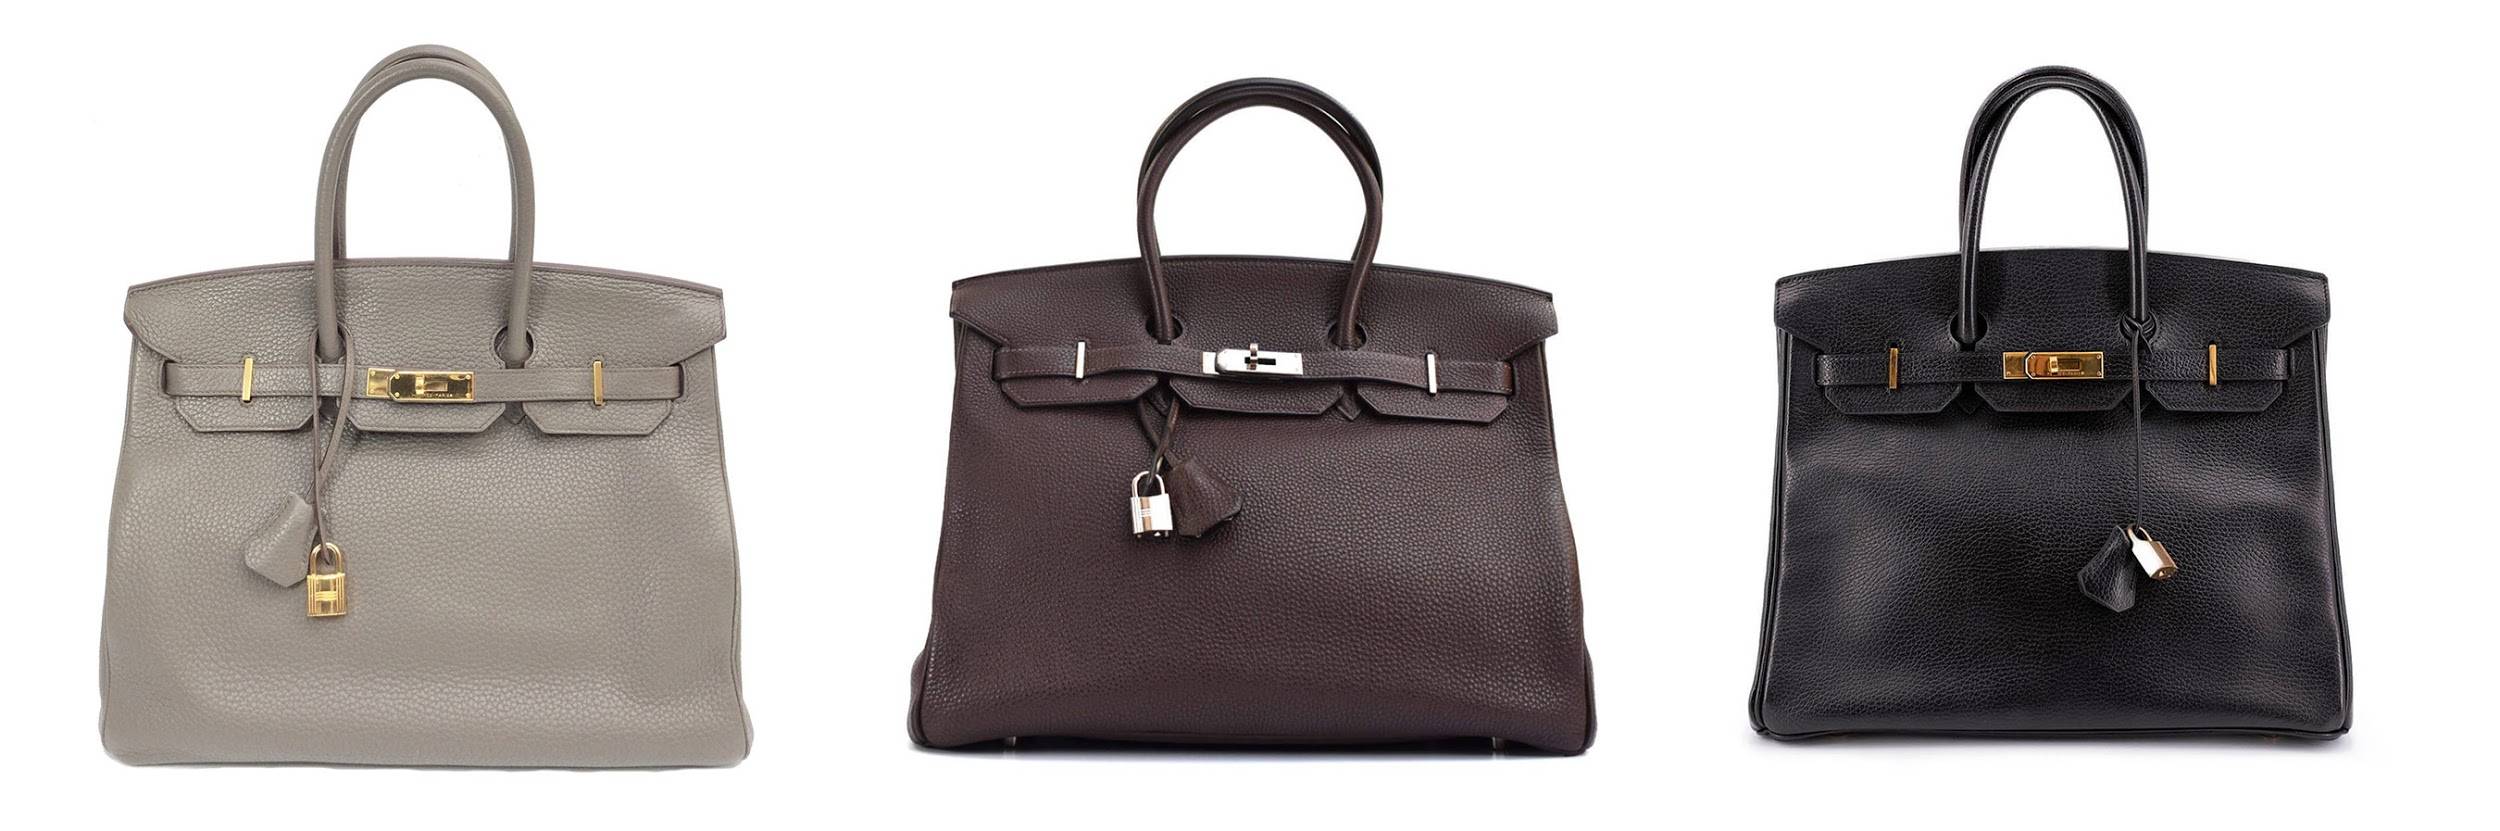 How Much Do Hermes Bags Cost? 5 Most Popular Hermes Bags | CODOGIRL